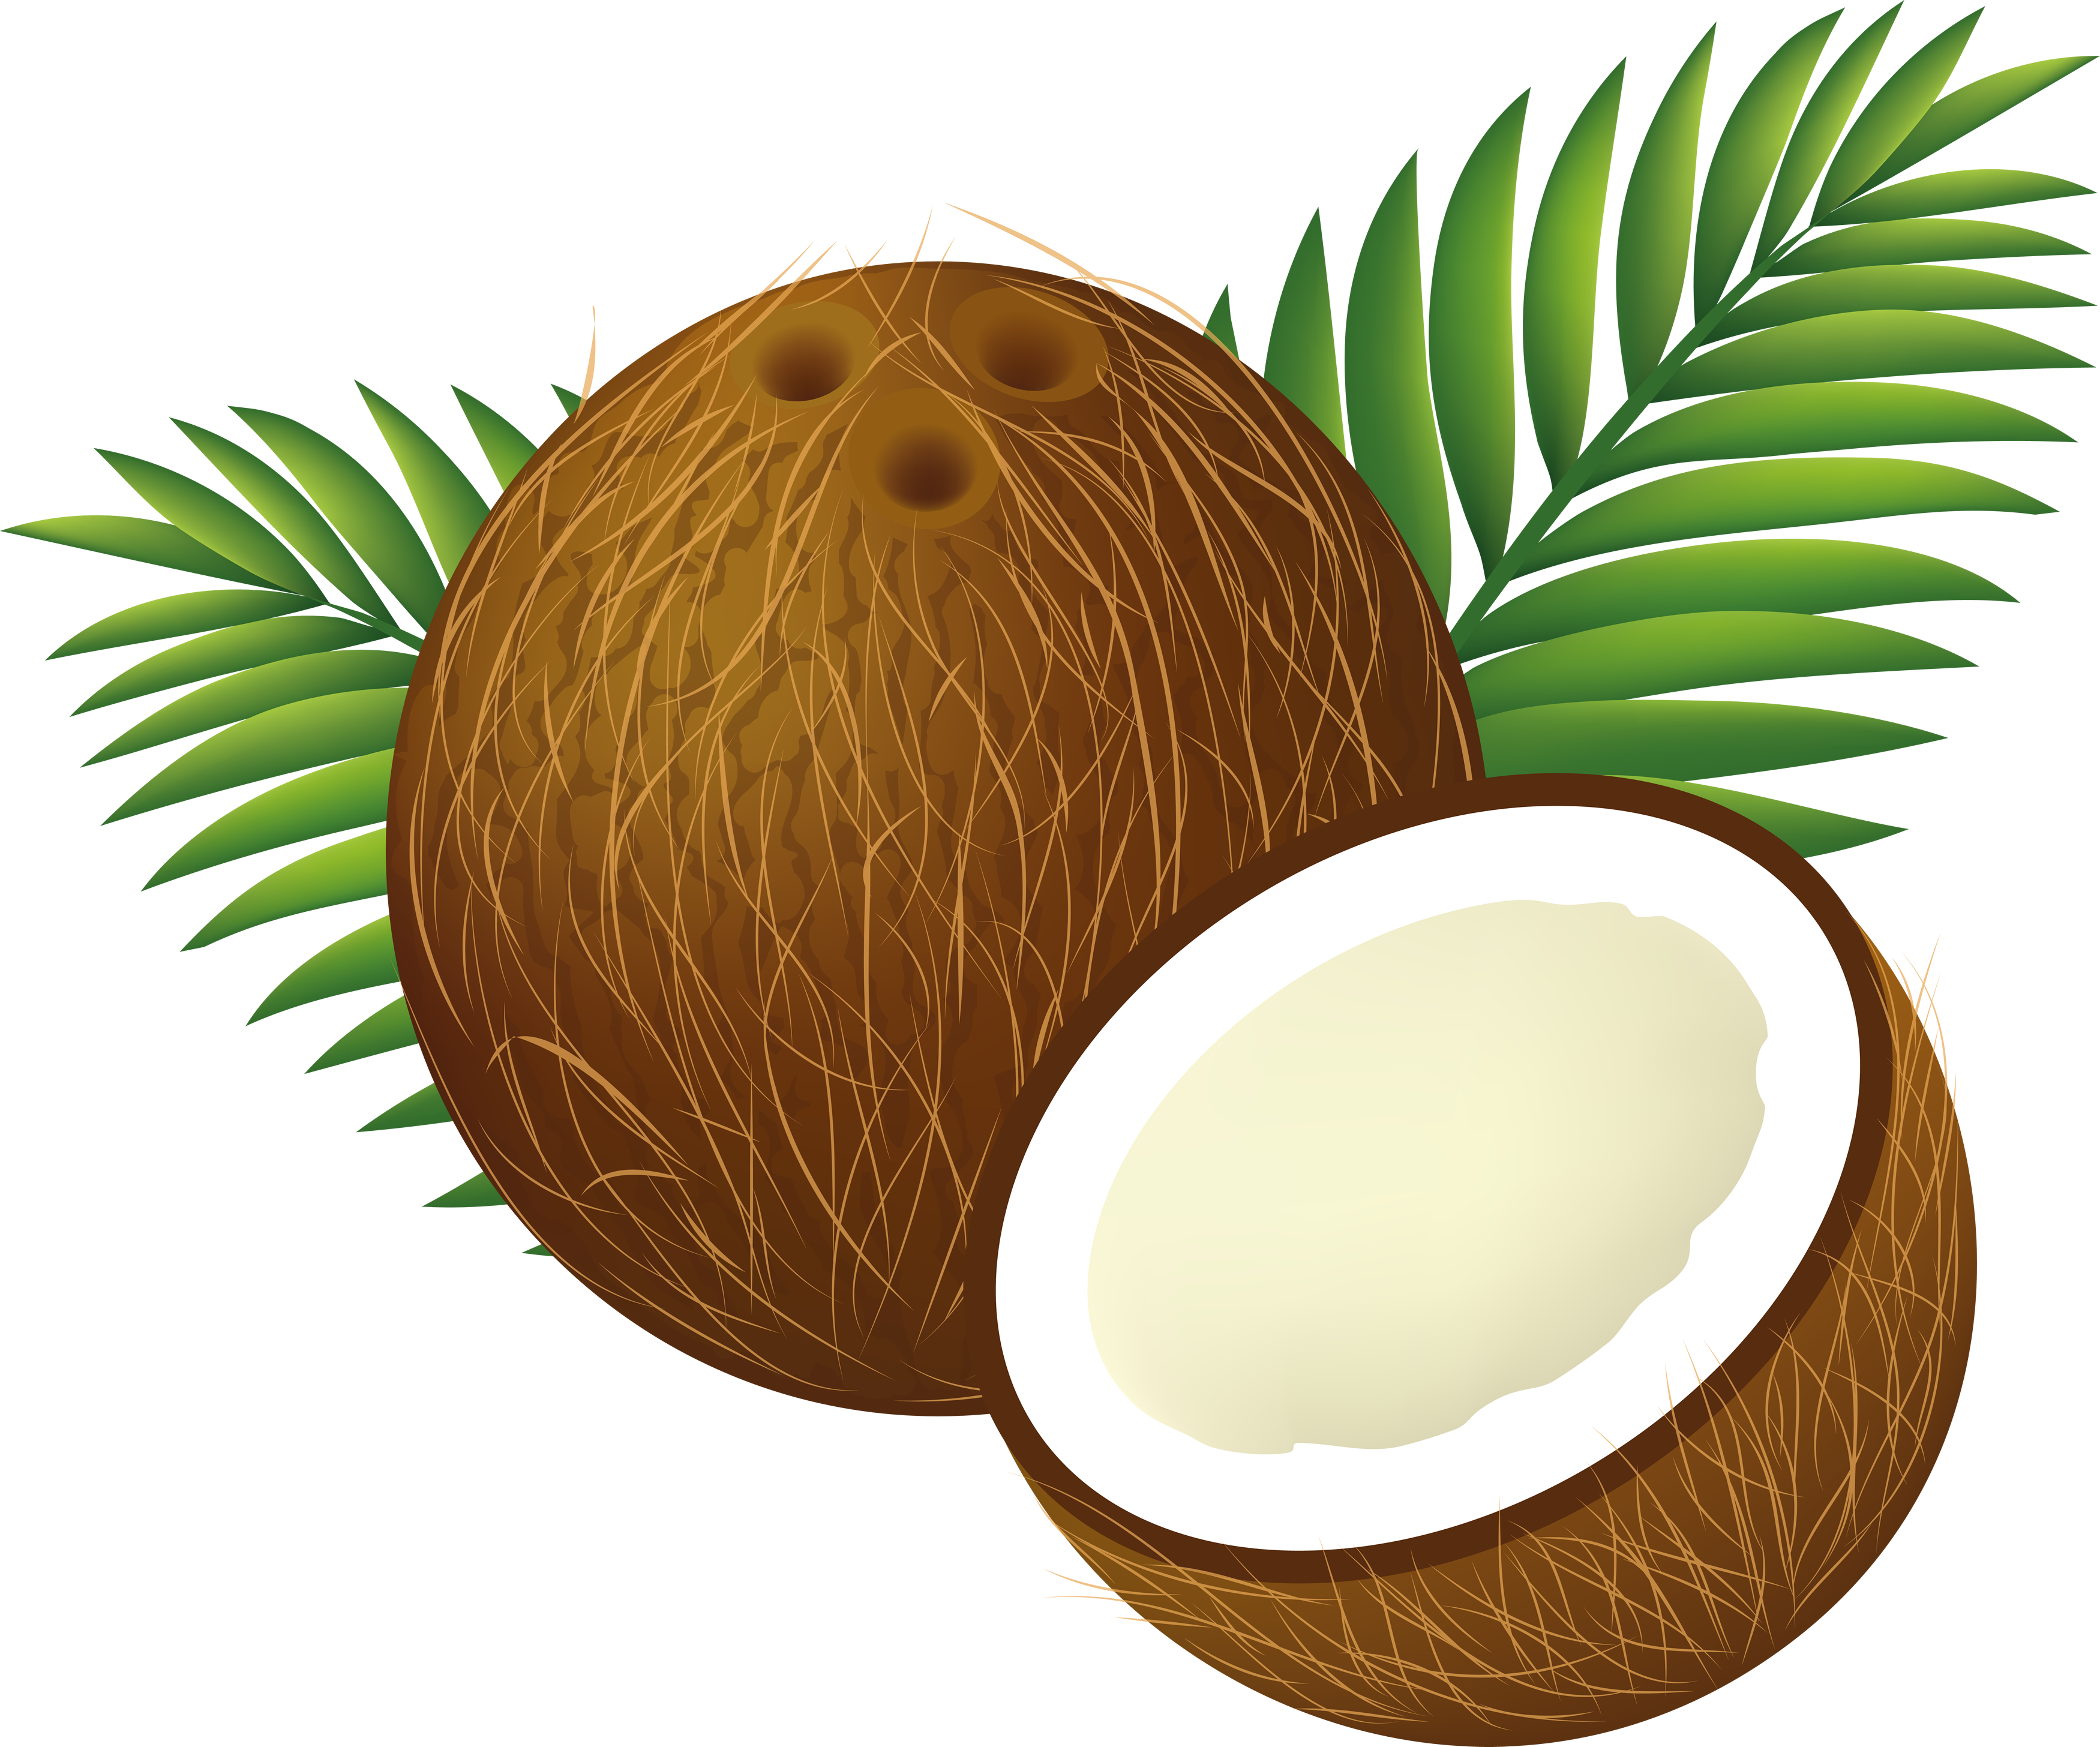 File:Coconut Clipart Cartoon.png - Wikimedia Commons